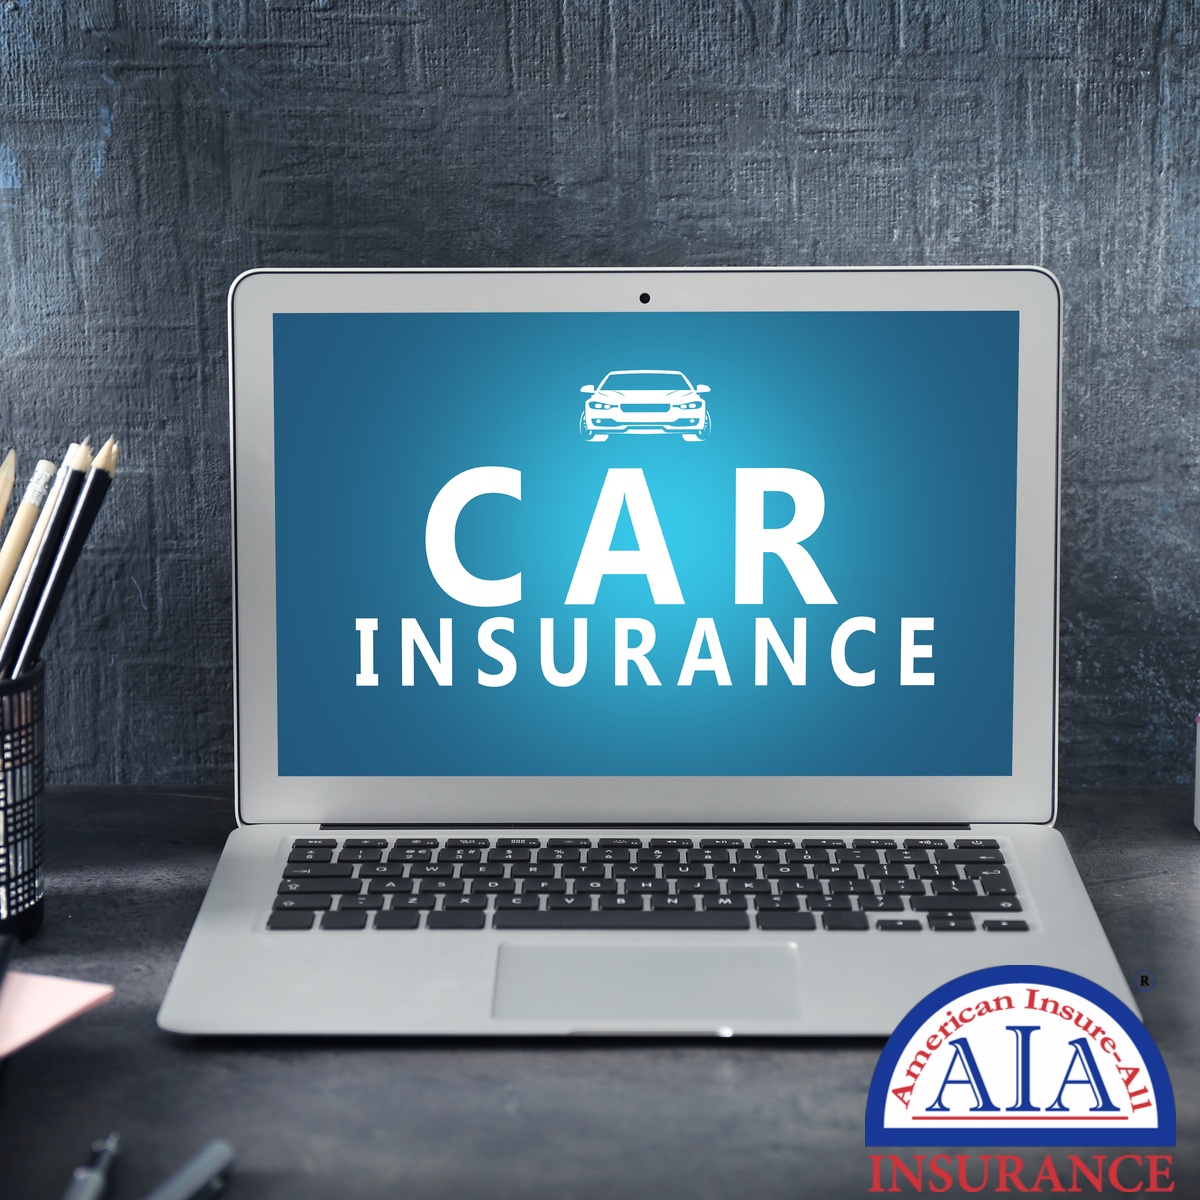 Finding Affordable Auto Insurance Quotes Is Easier Than Ever